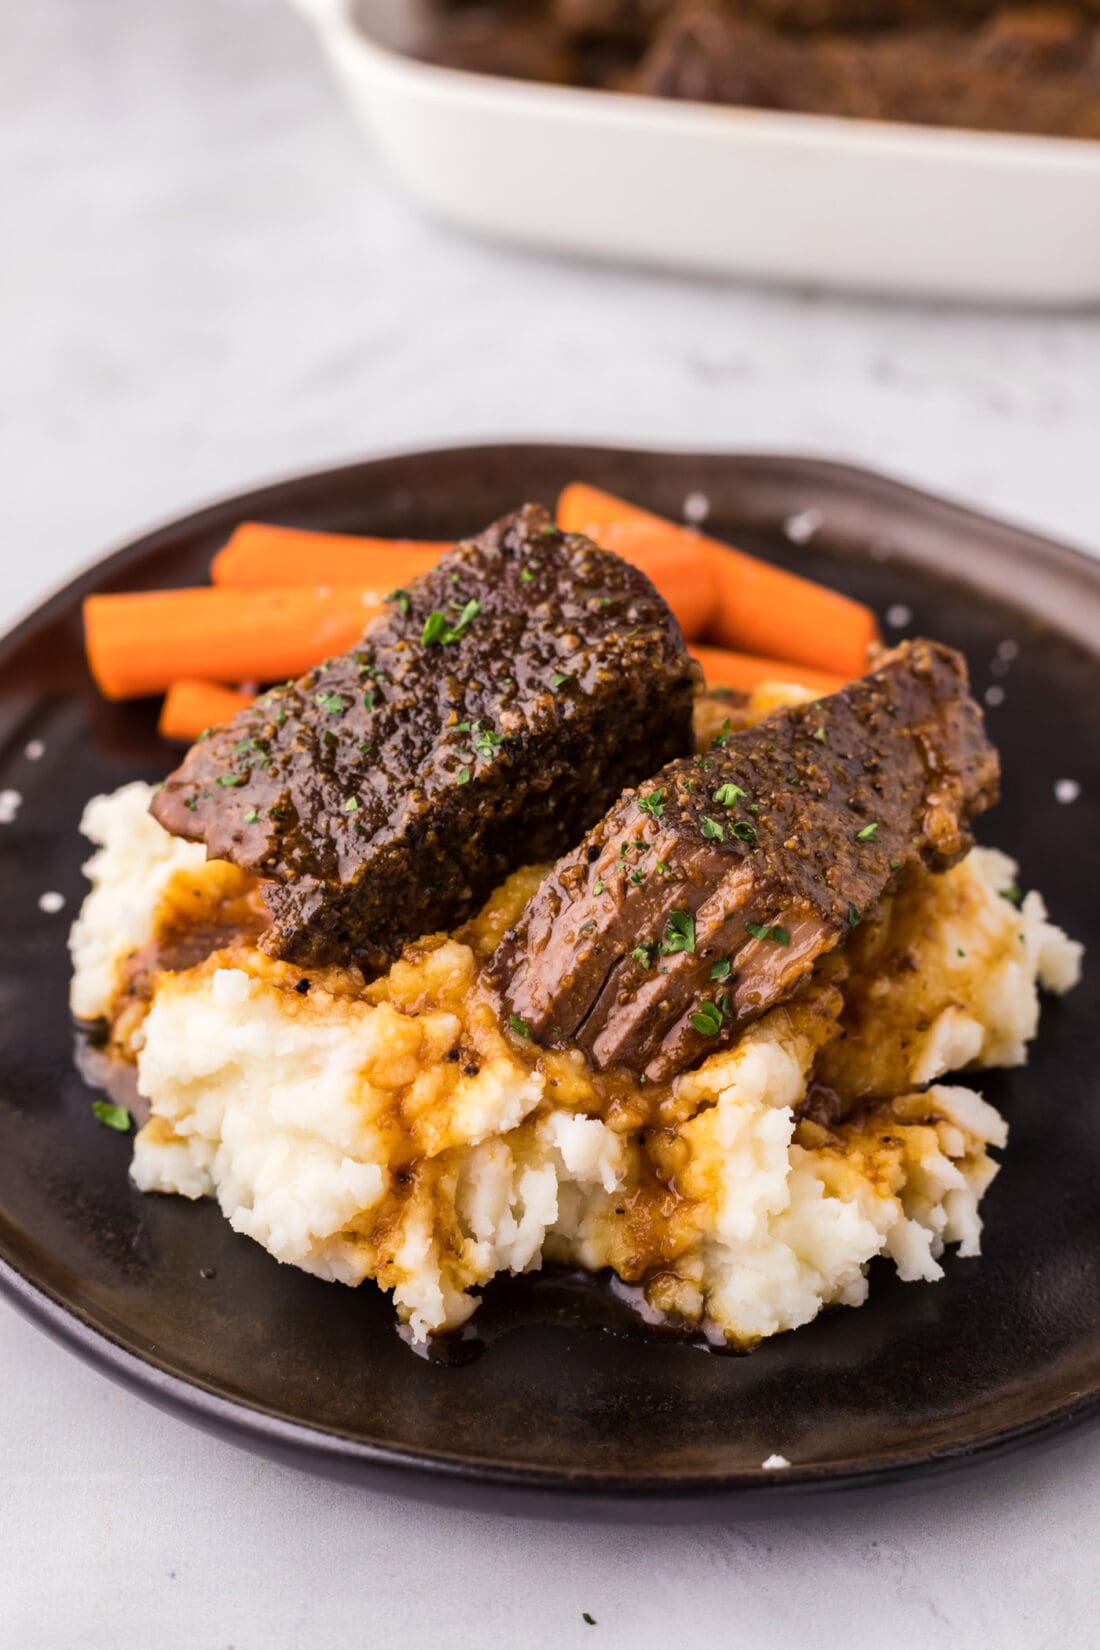 Boneless Beef Short Ribs served over mashed potatoes on a plate